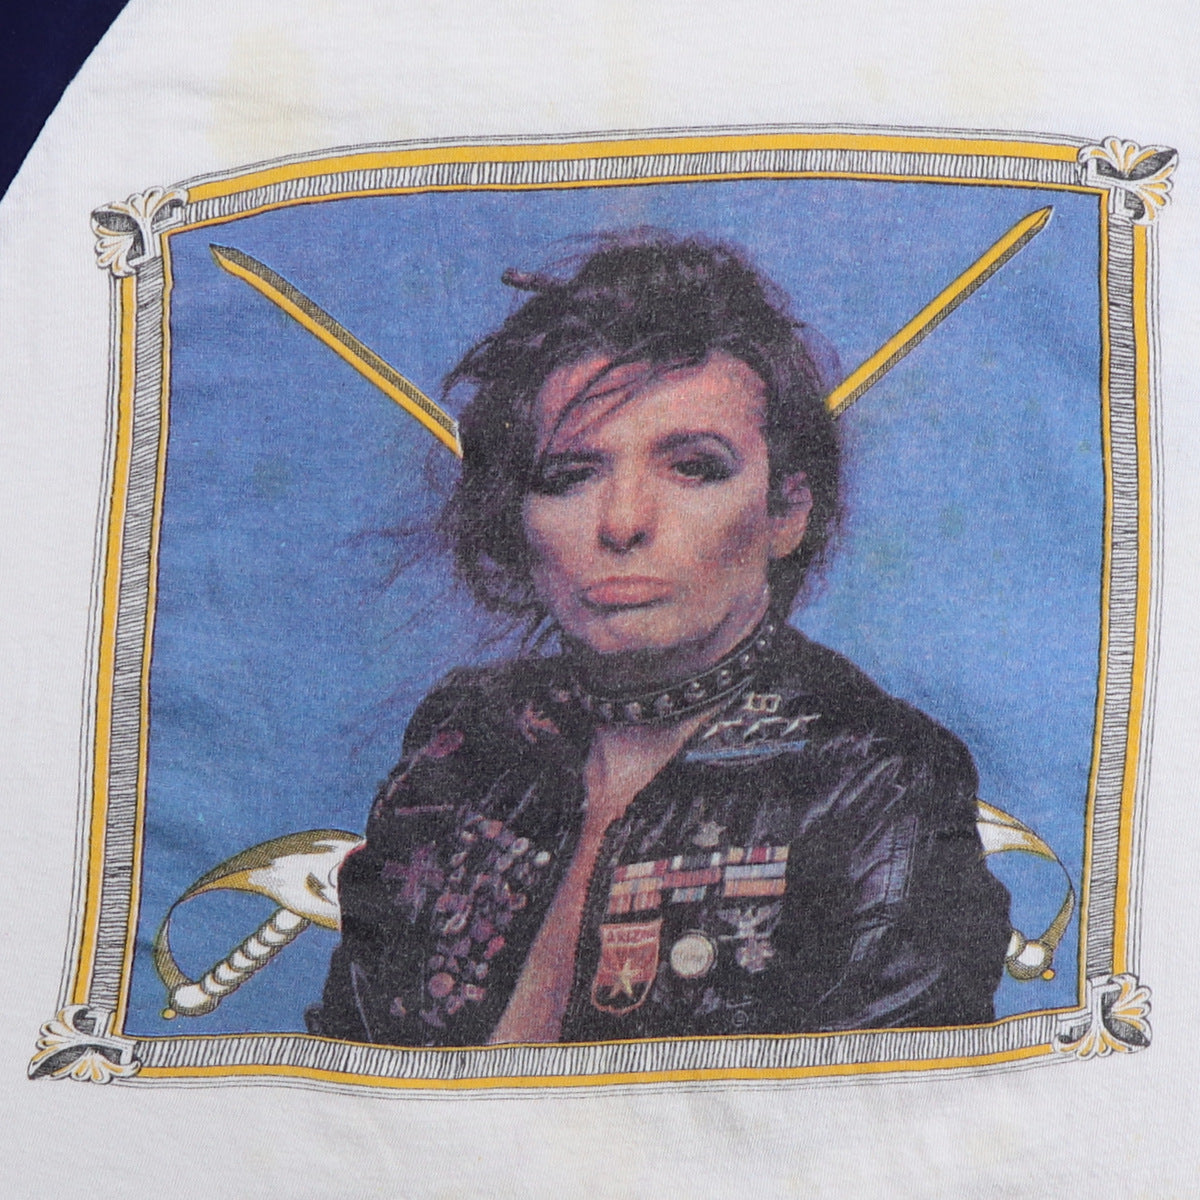 1981 Alice Cooper Special Forces Jersey Shirt